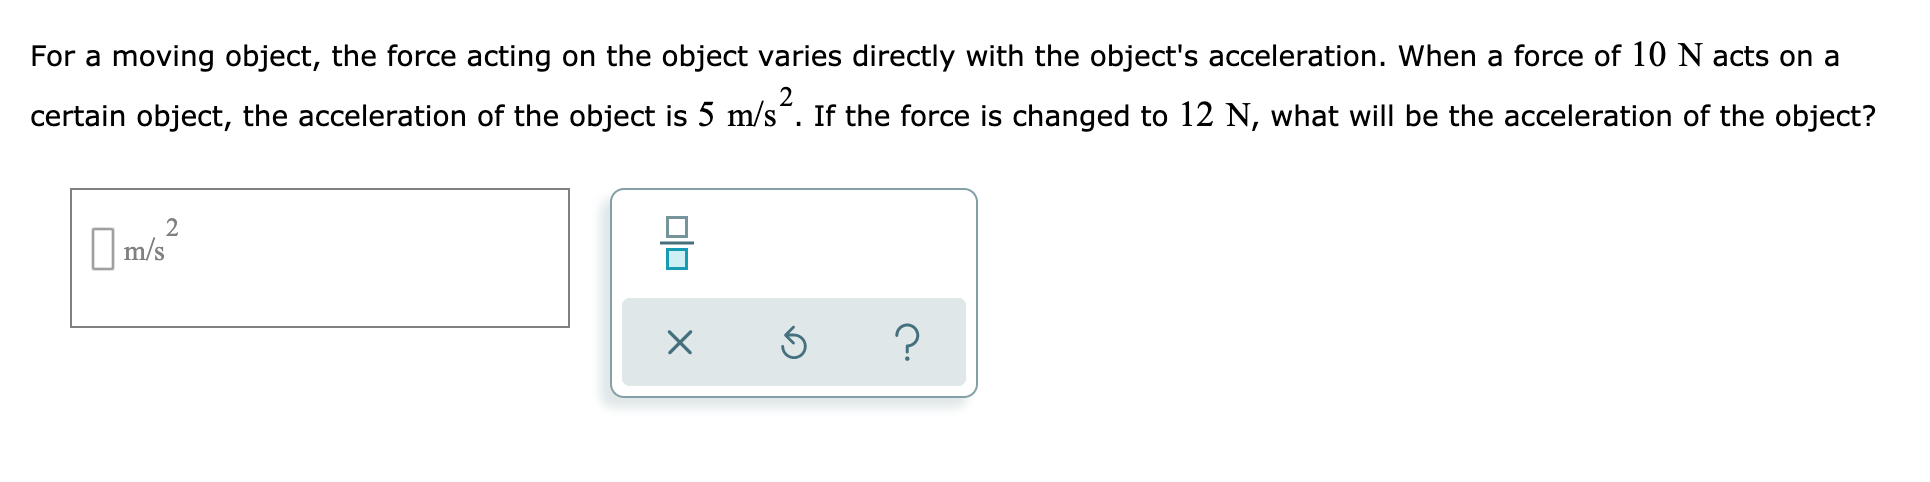 For a moving object, the force acting on the object varies directly with the object's acceleration. When a force of 10 N acts on a
certain object, the acceleration of the object is 5 m/s". If the force is changed to 12 N, what will be the acceleration of the object?
I m/s
